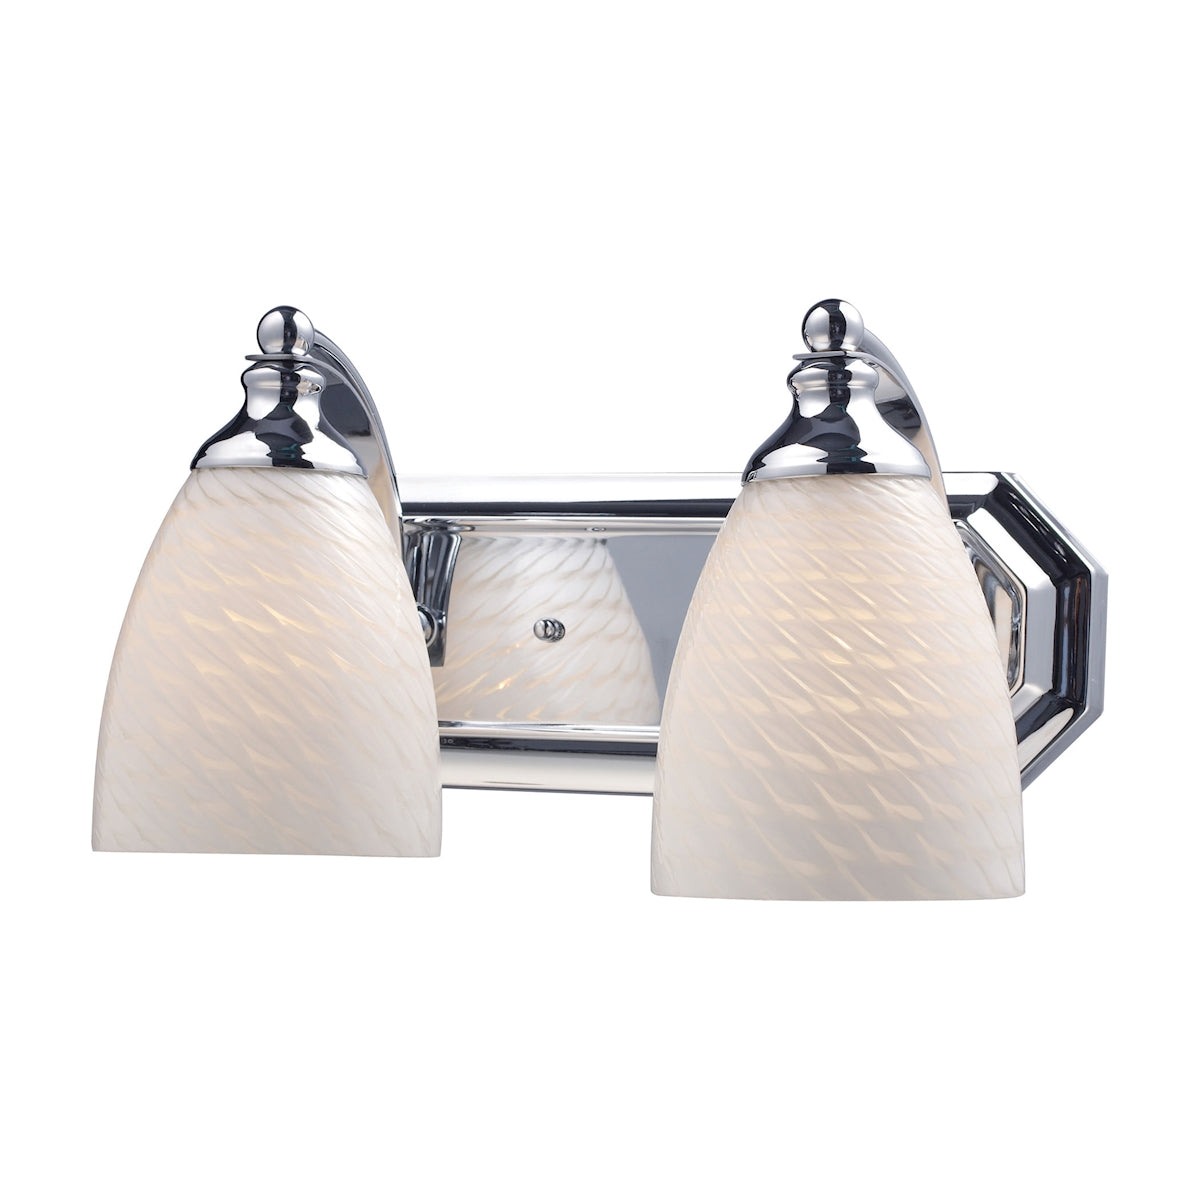 ELK Lighting 570-2C-WS Mix and Match Vanity 2-Light Wall Lamp in Chrome with White Swirl Glass